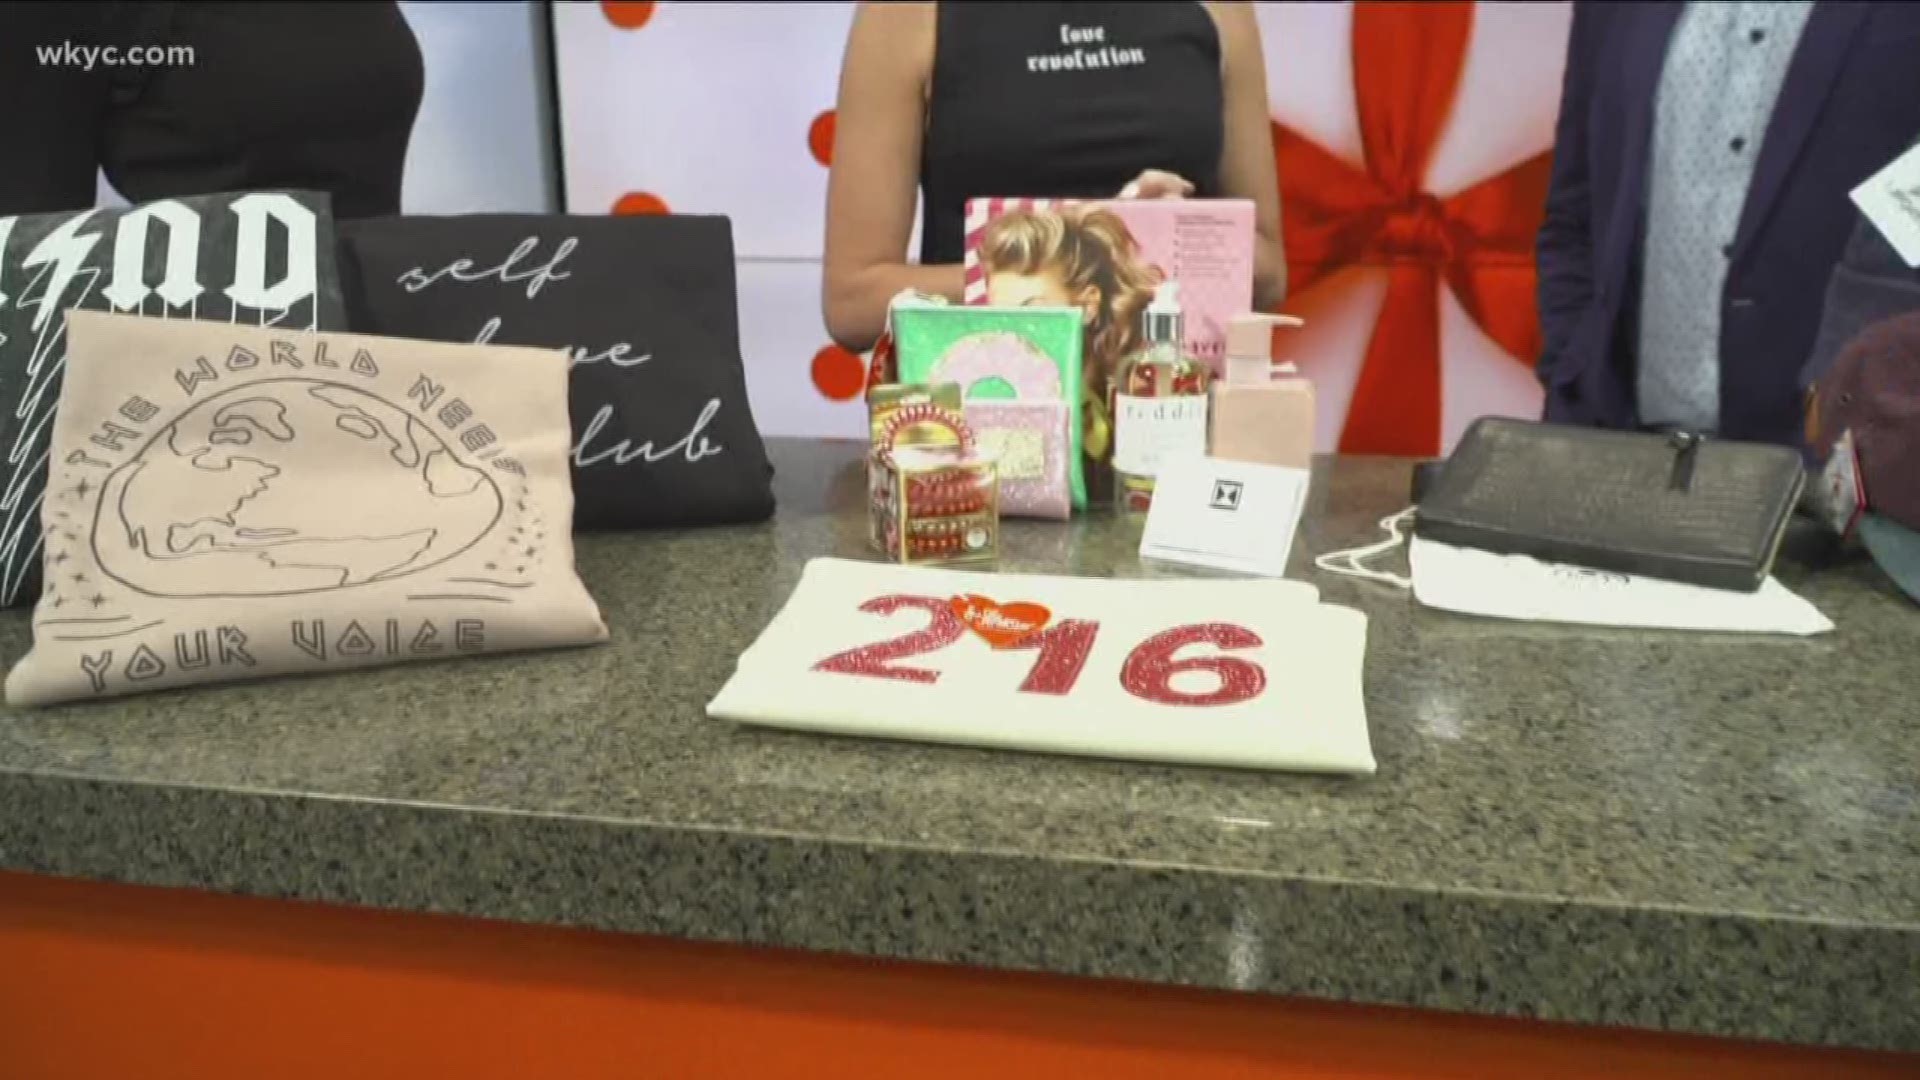 Valentine's Day is just two days away. 3News' Betsy Kling and Jay Crawford explore some Cleveland inspired options.